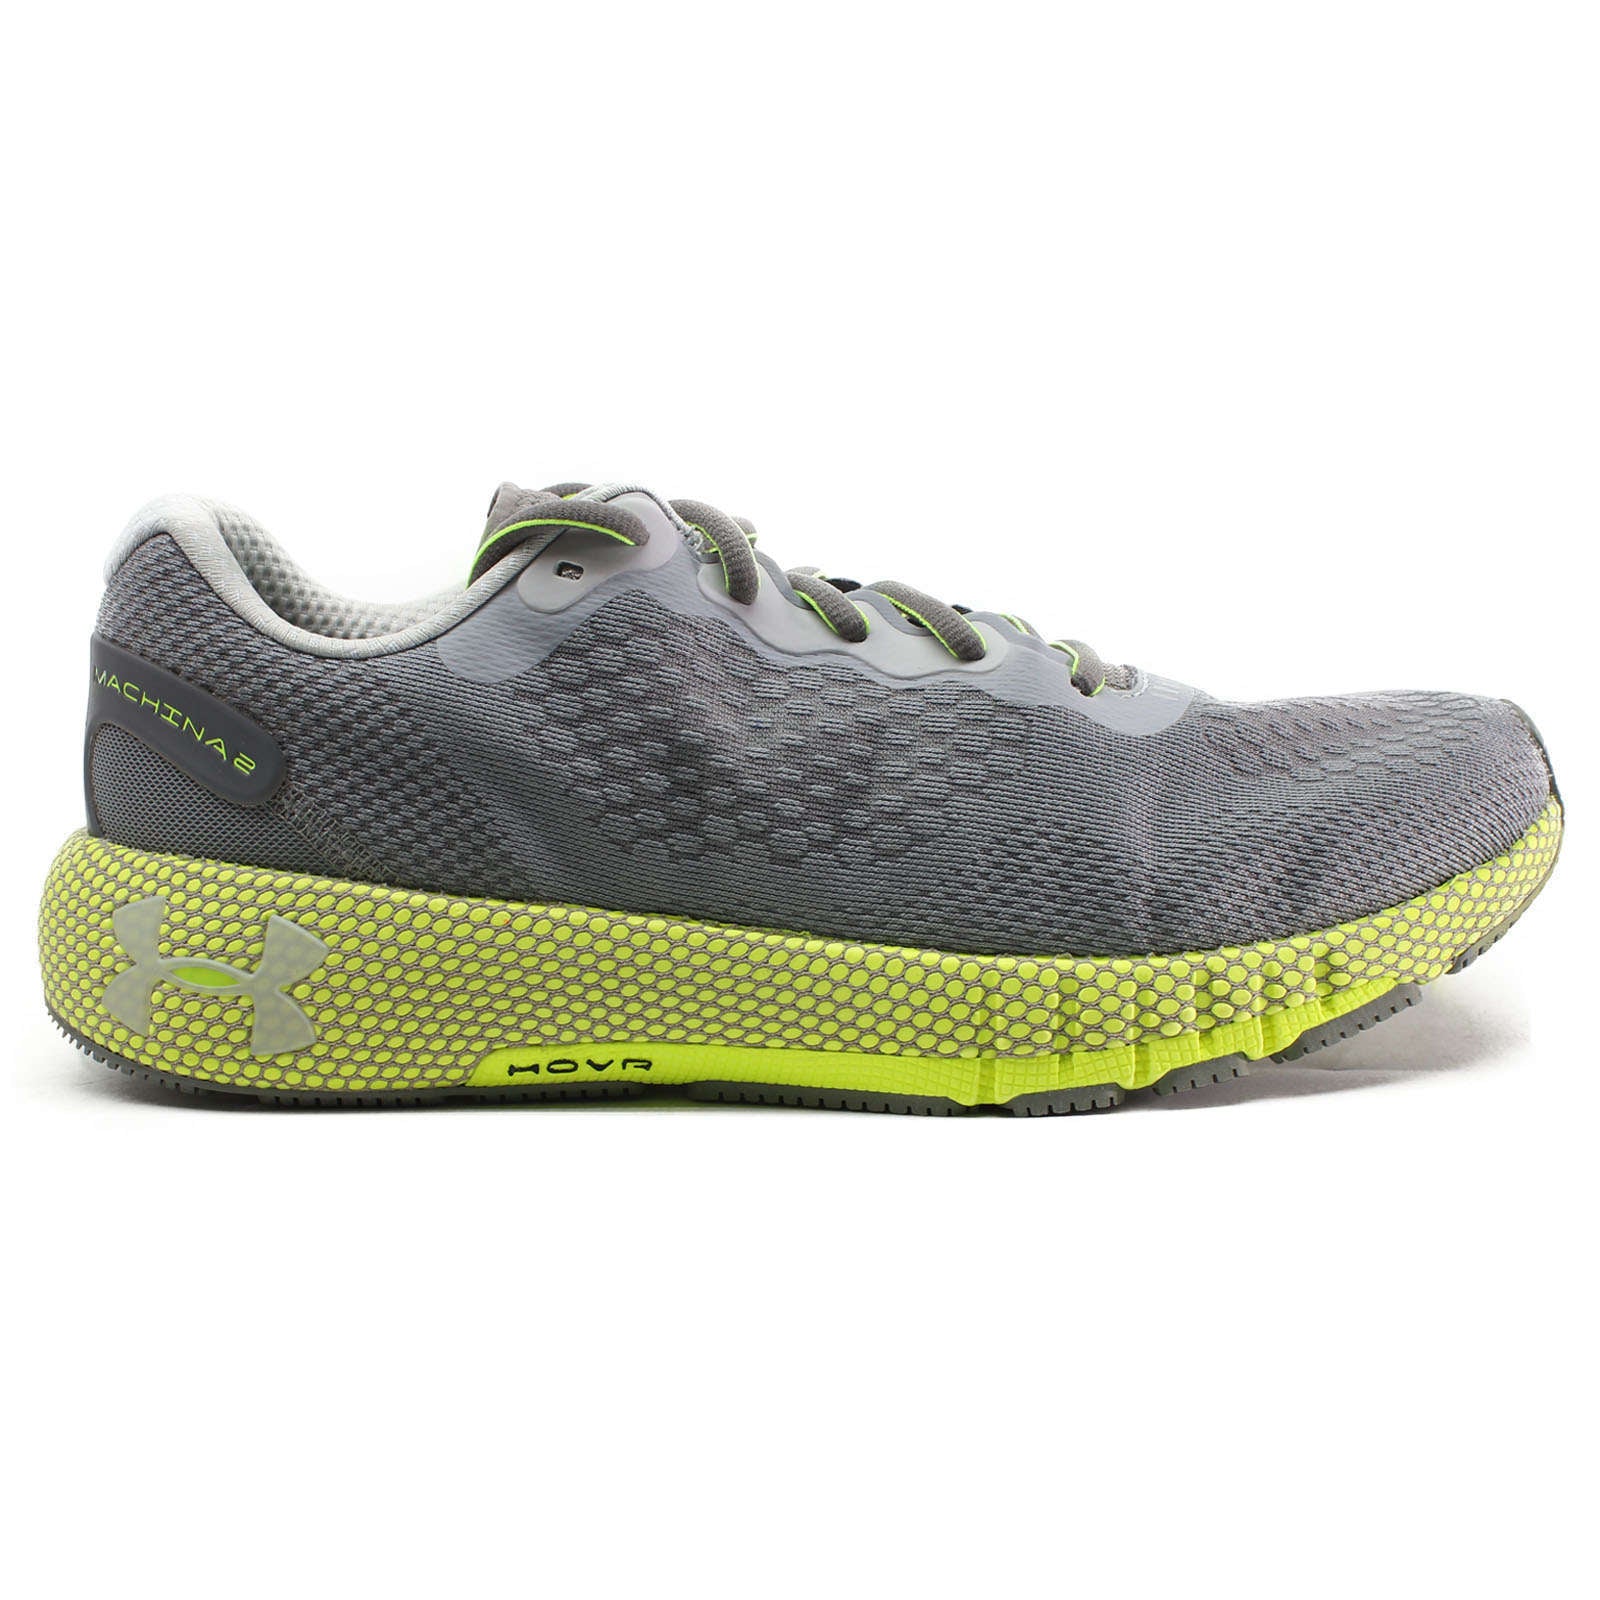 Under Armour HOVR Machina 2 Synthetic Textile Men's Low-Top Trainers#color_grey yellow